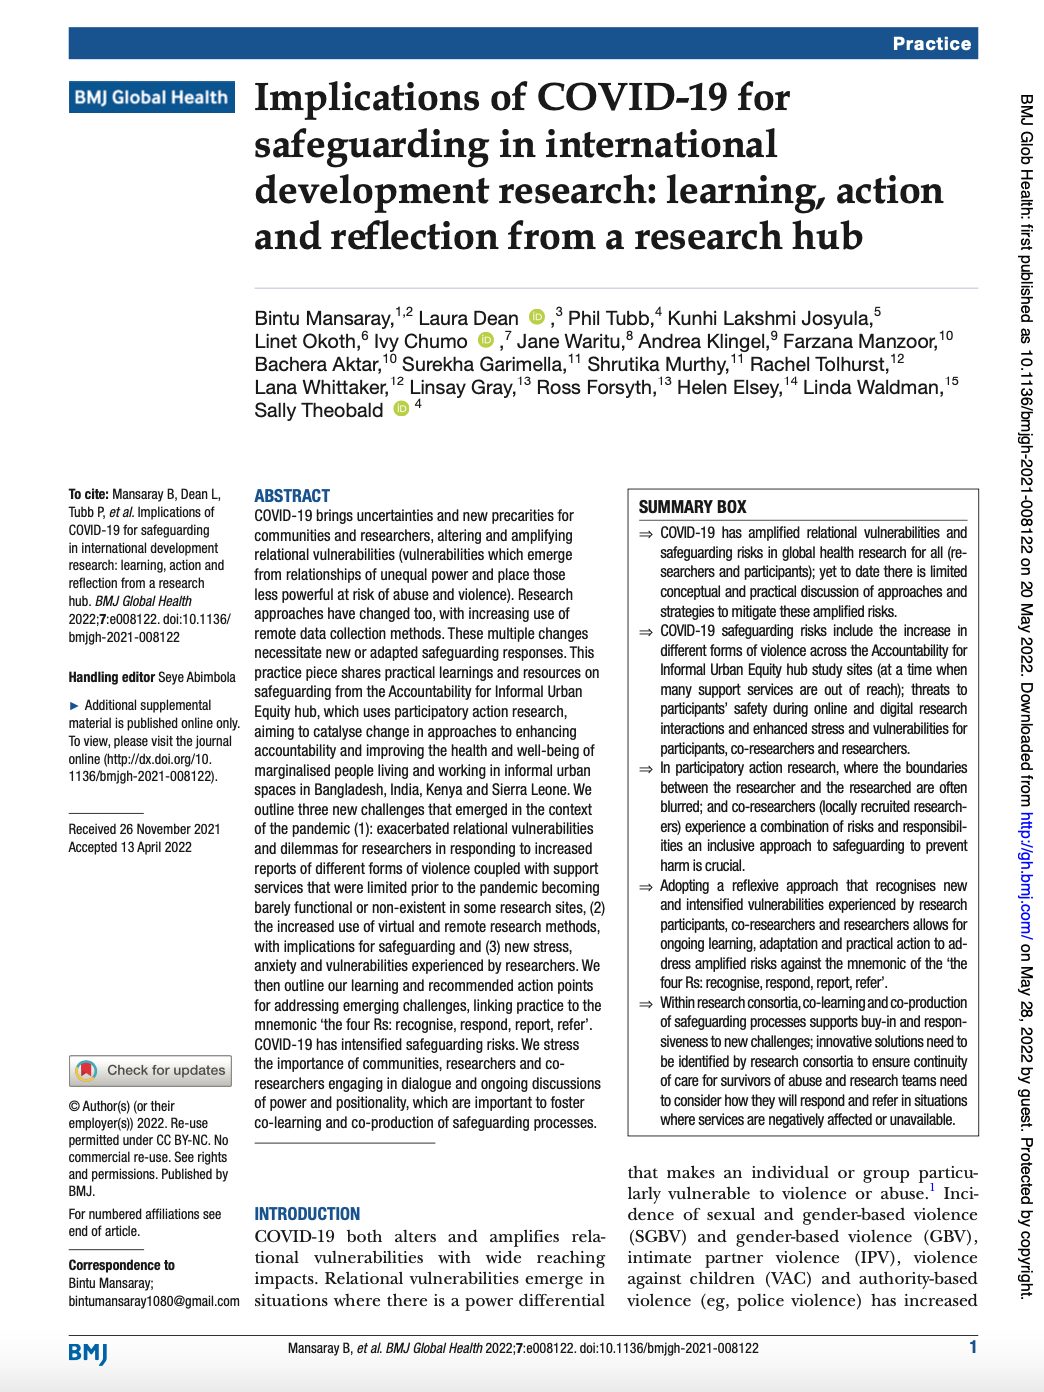 Implications of COVID-19 for safeguarding in international development research: learning, action and reflection from a research hub